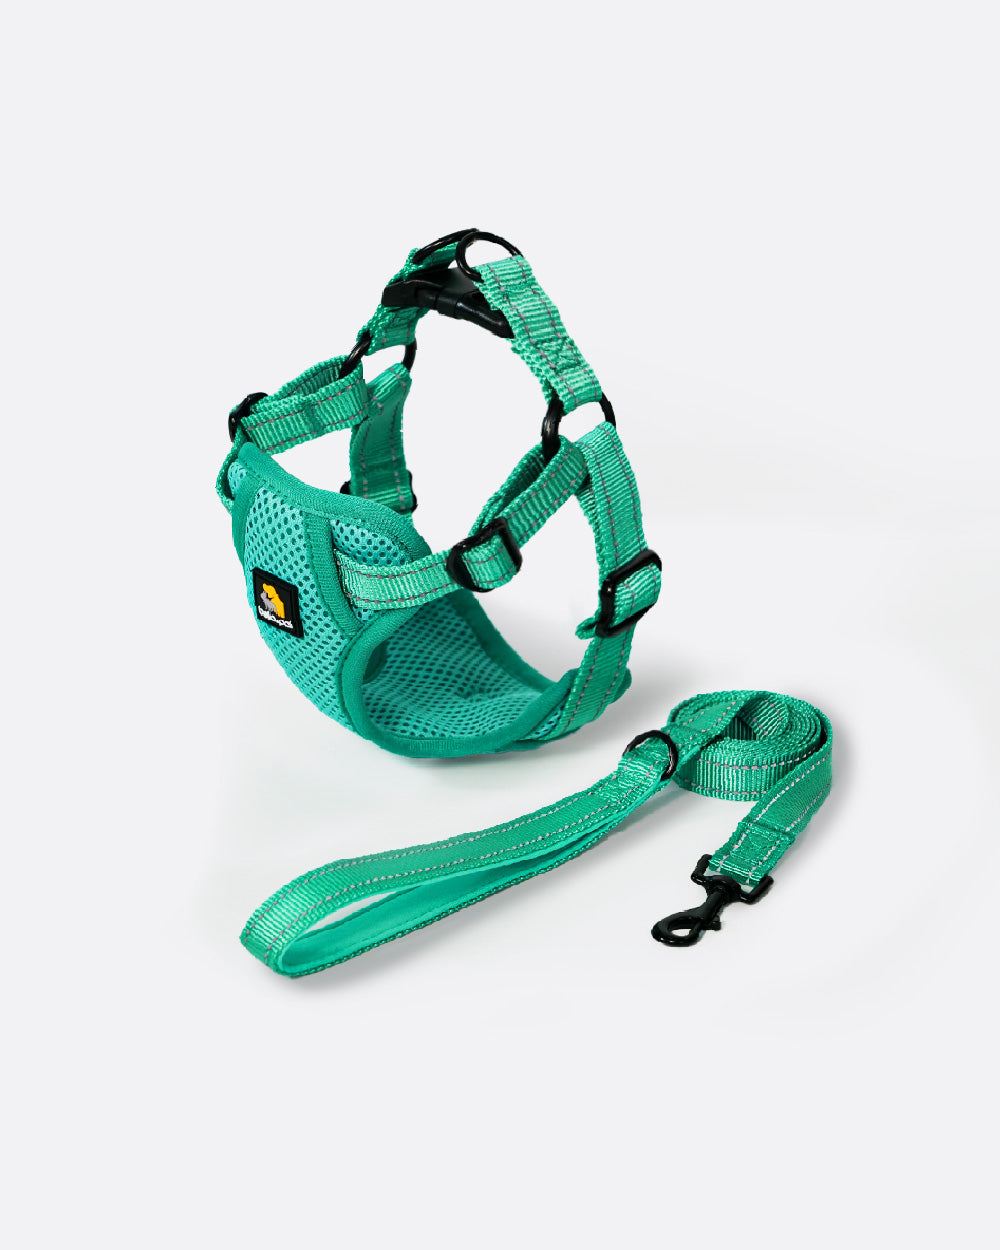 OxyMesh Flexi Step-in Harness and Leash Set - Emerald